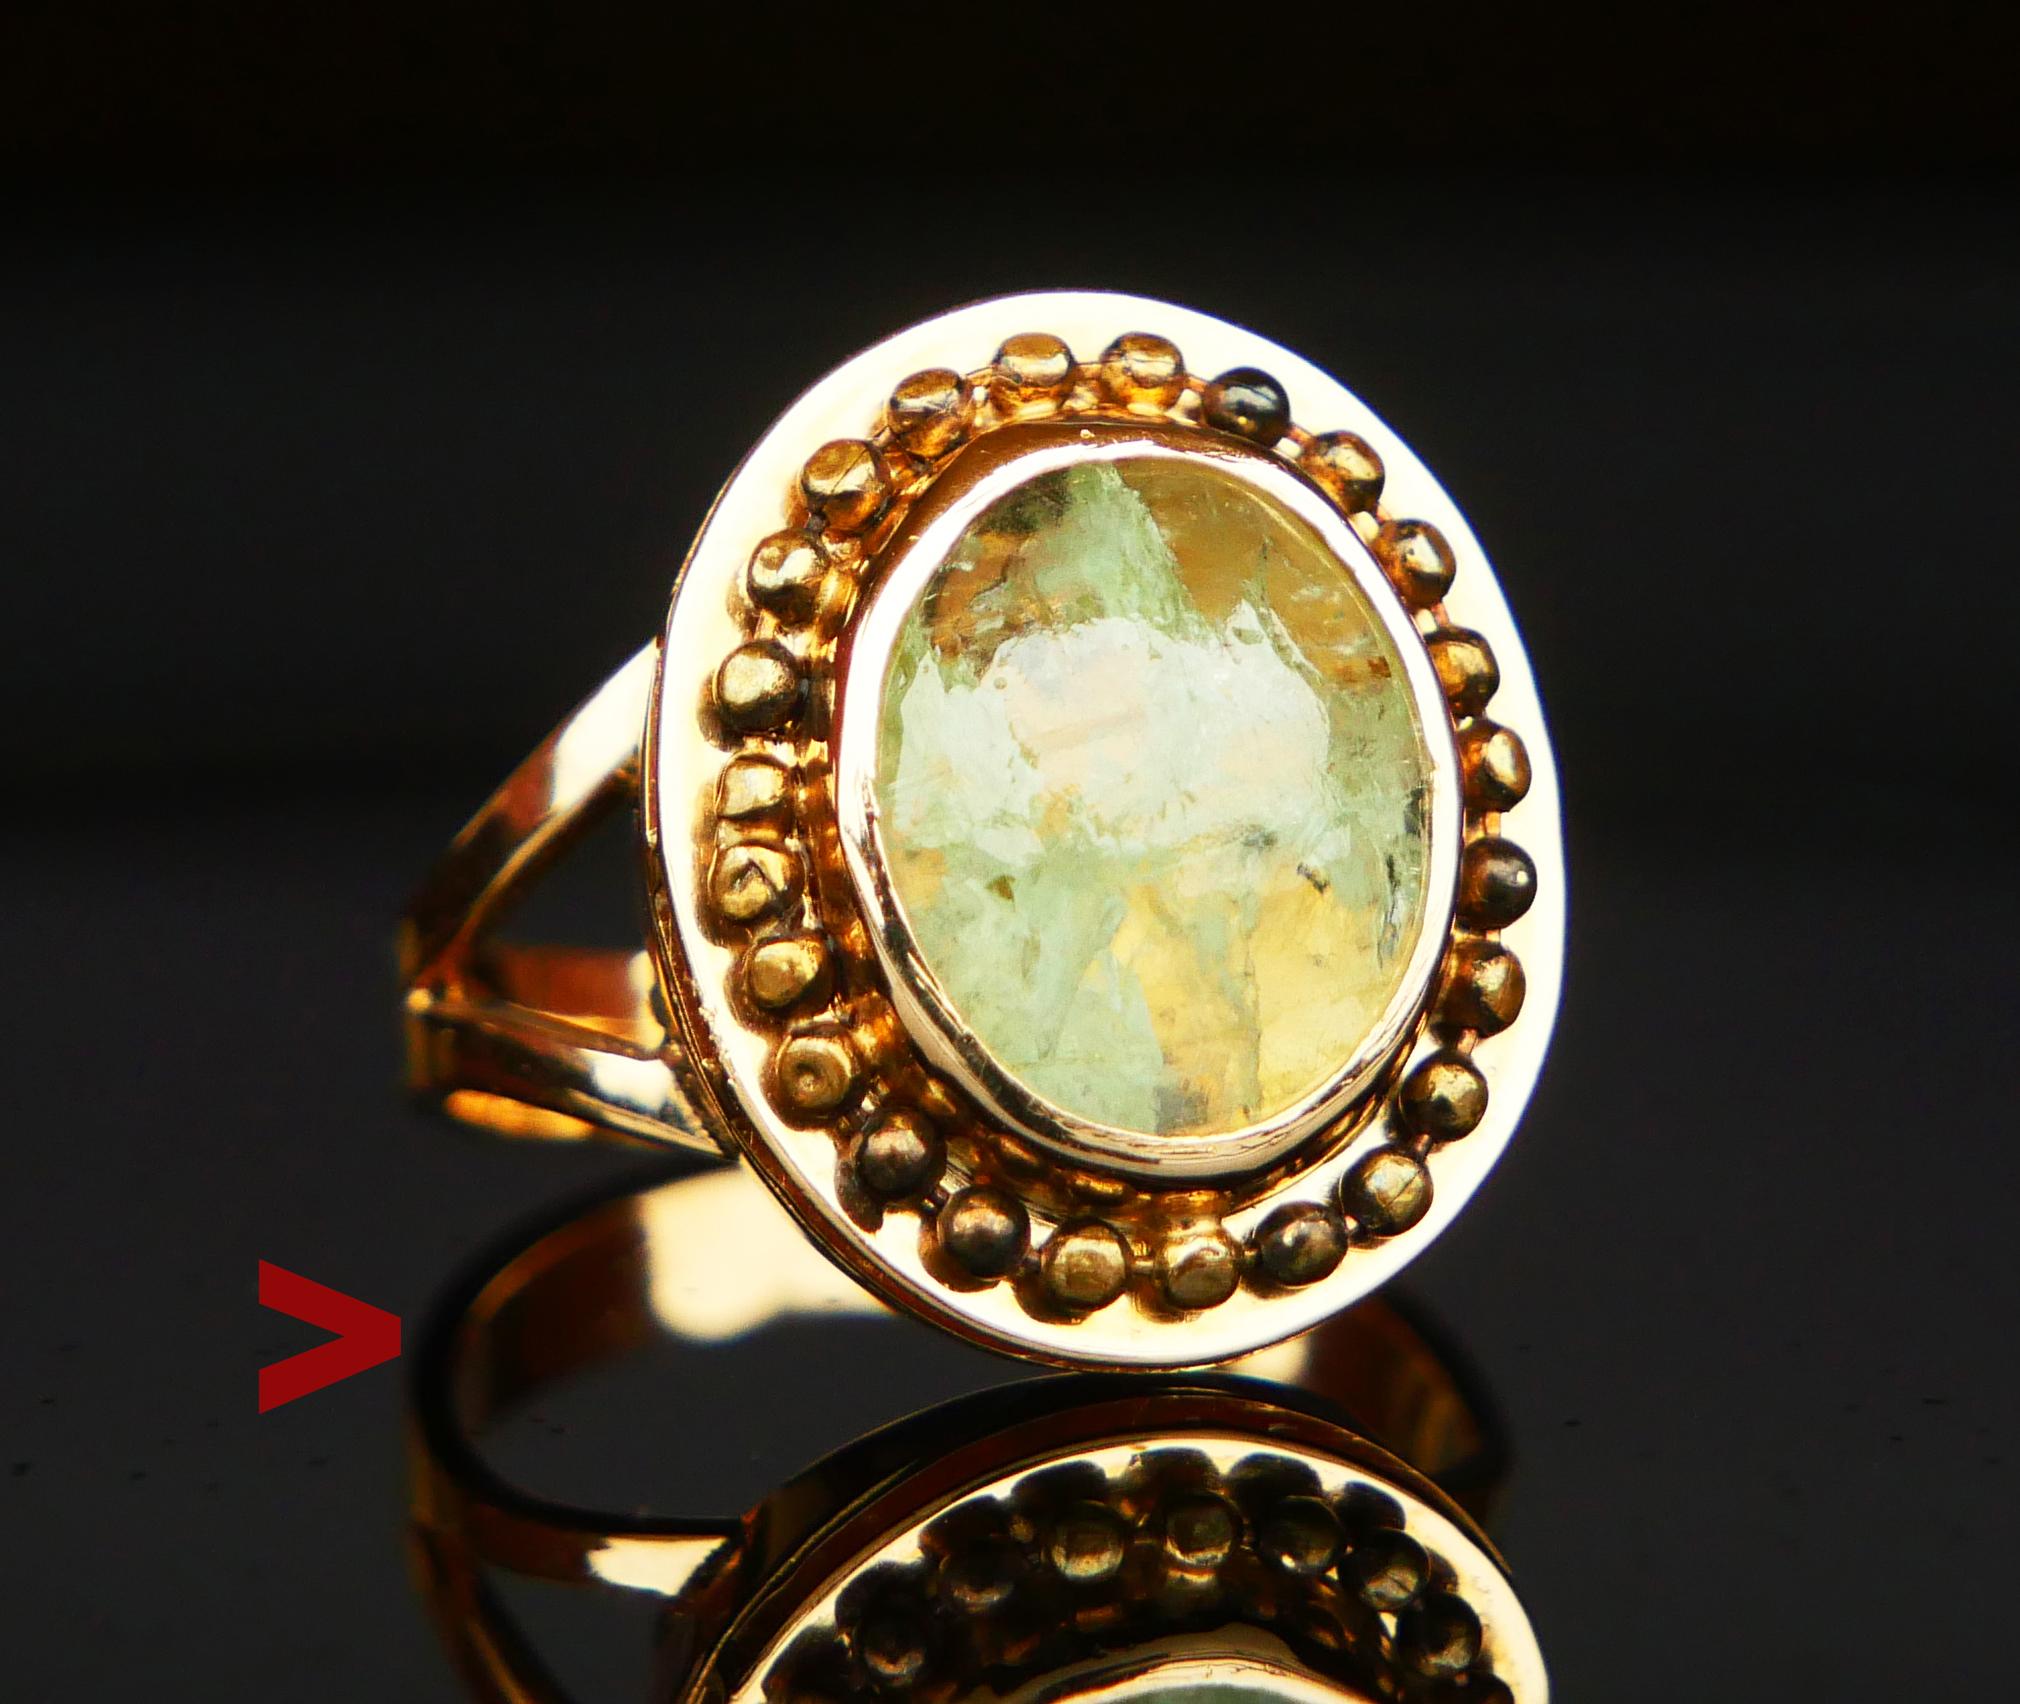 Beautiful Ring for the female hand. Made of solid 18K Yellow Gold. Bezel set cabochon of natural Heliodor / greenish-yellow shades variety of Beryl measuring about 11mm x 9 mm x 6mm deep / about 4 ct. The stone has natural flaws and inclusions.